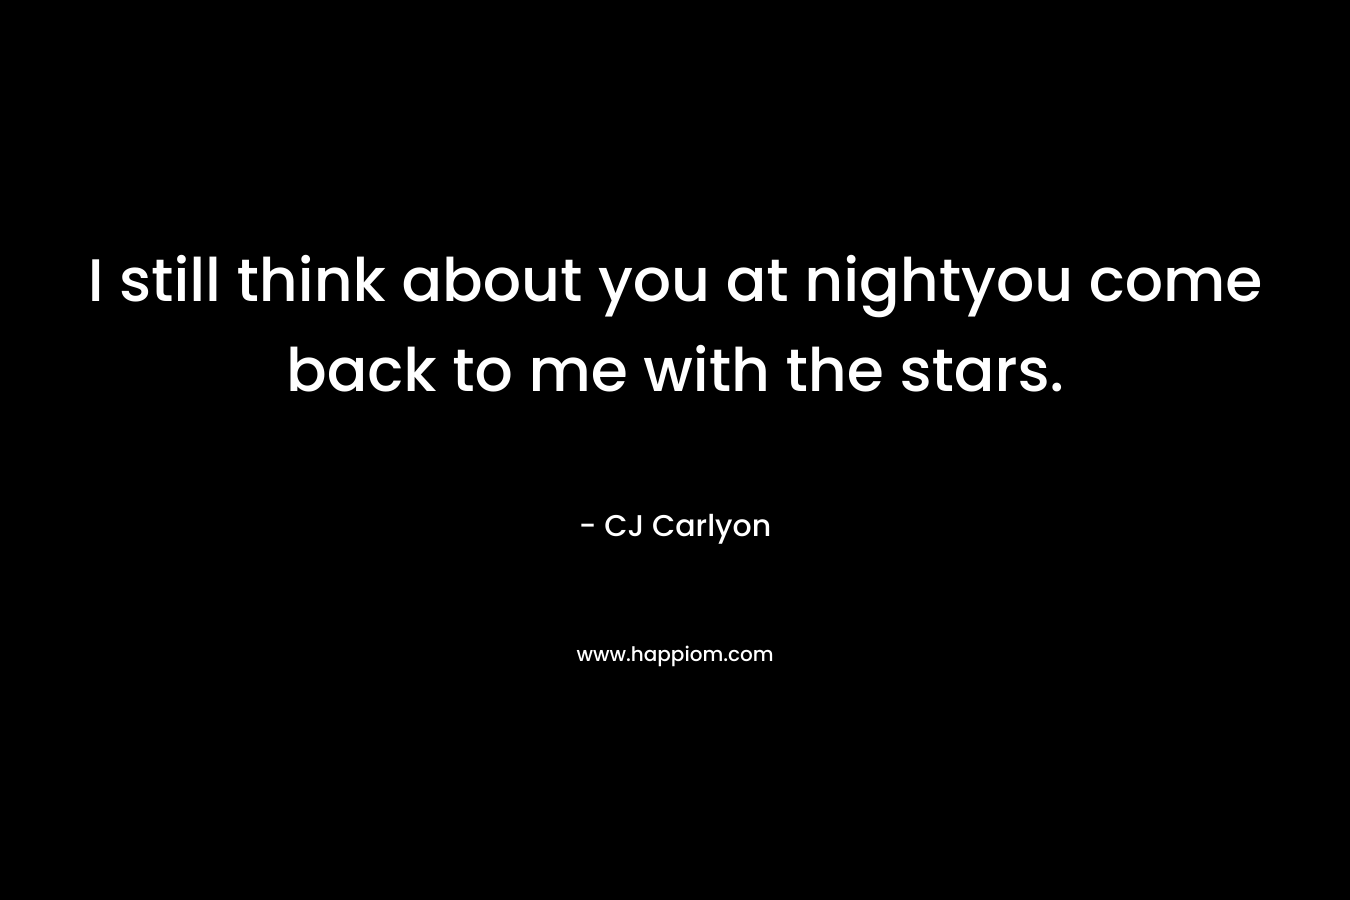 I still think about you at nightyou come back to me with the stars.